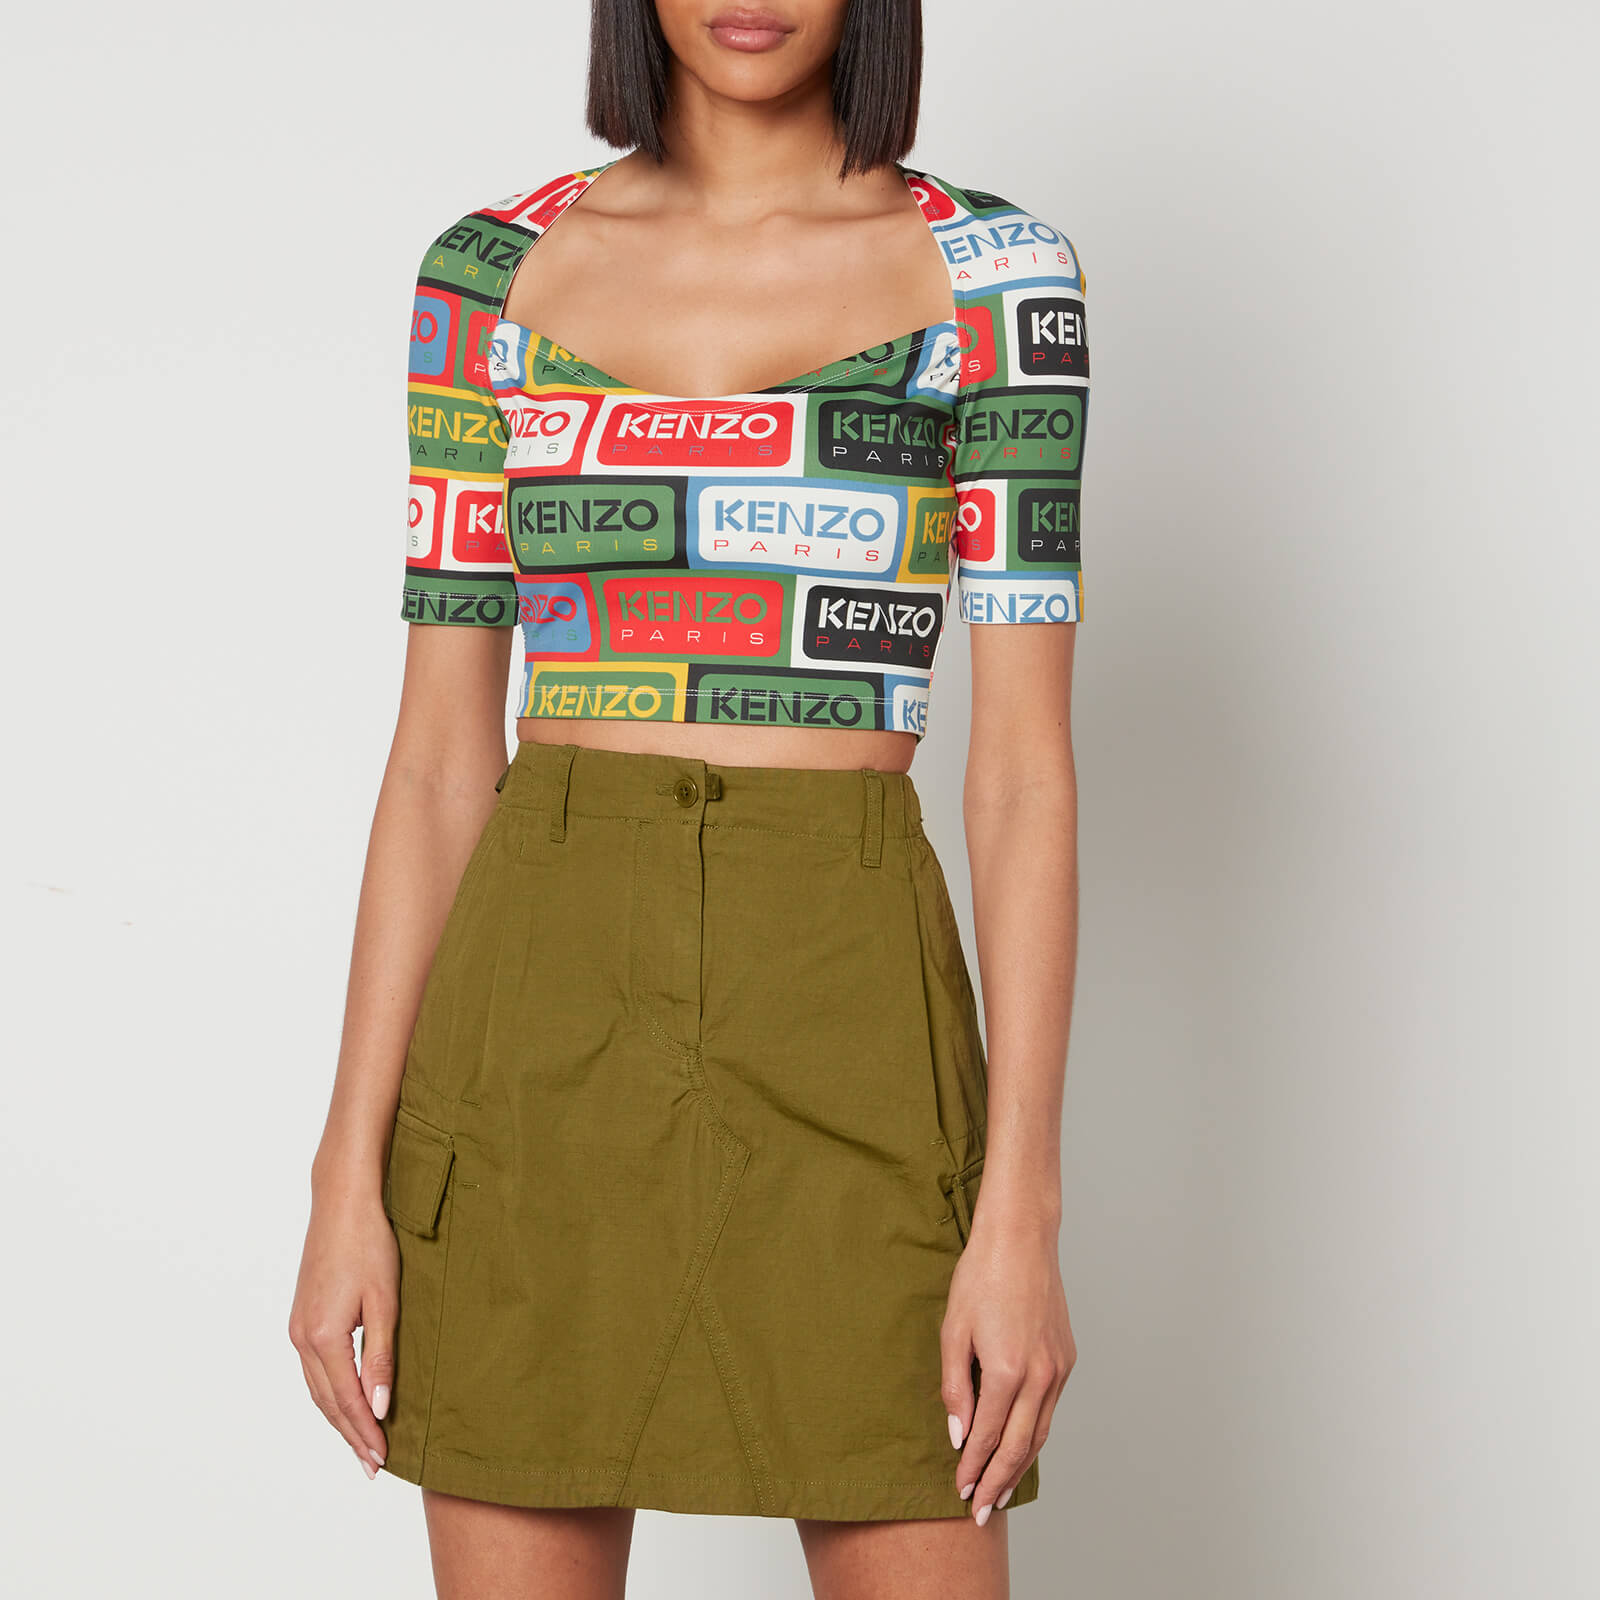 kenzo cropped printed jersey top - s